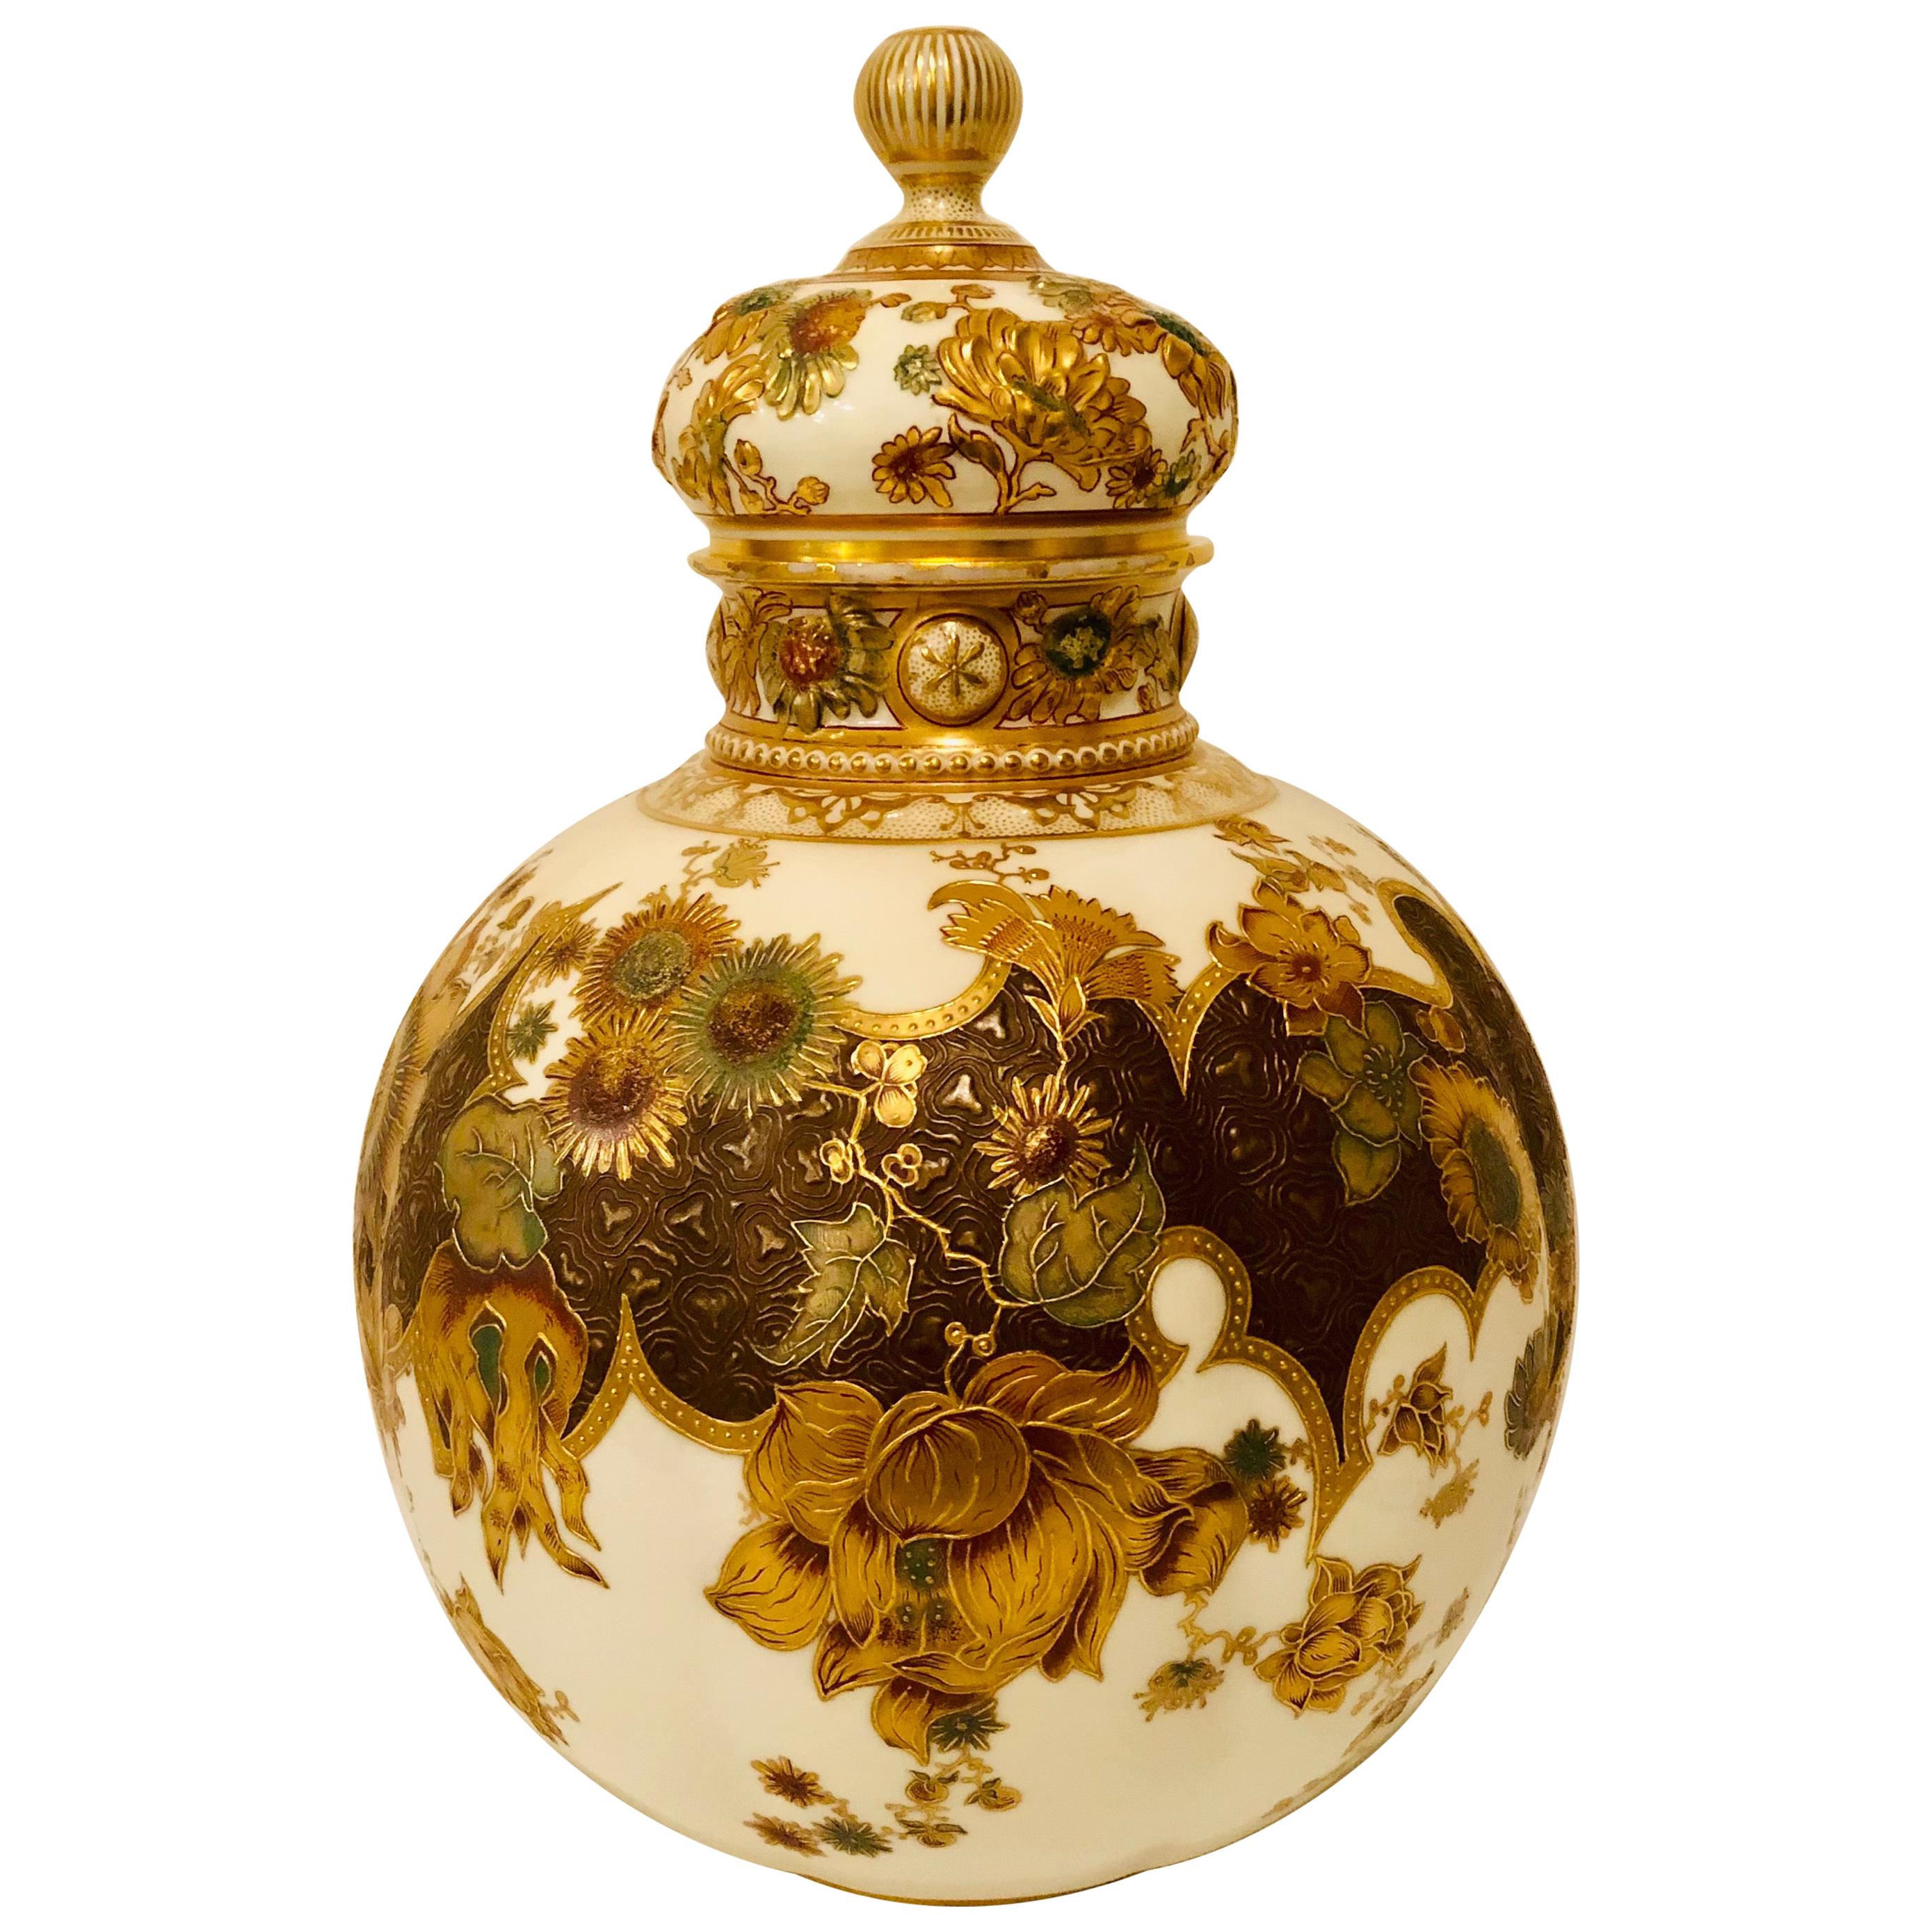 Museum Quality Royal Crown Derby Urn with Raised Gold and Flower Decorations